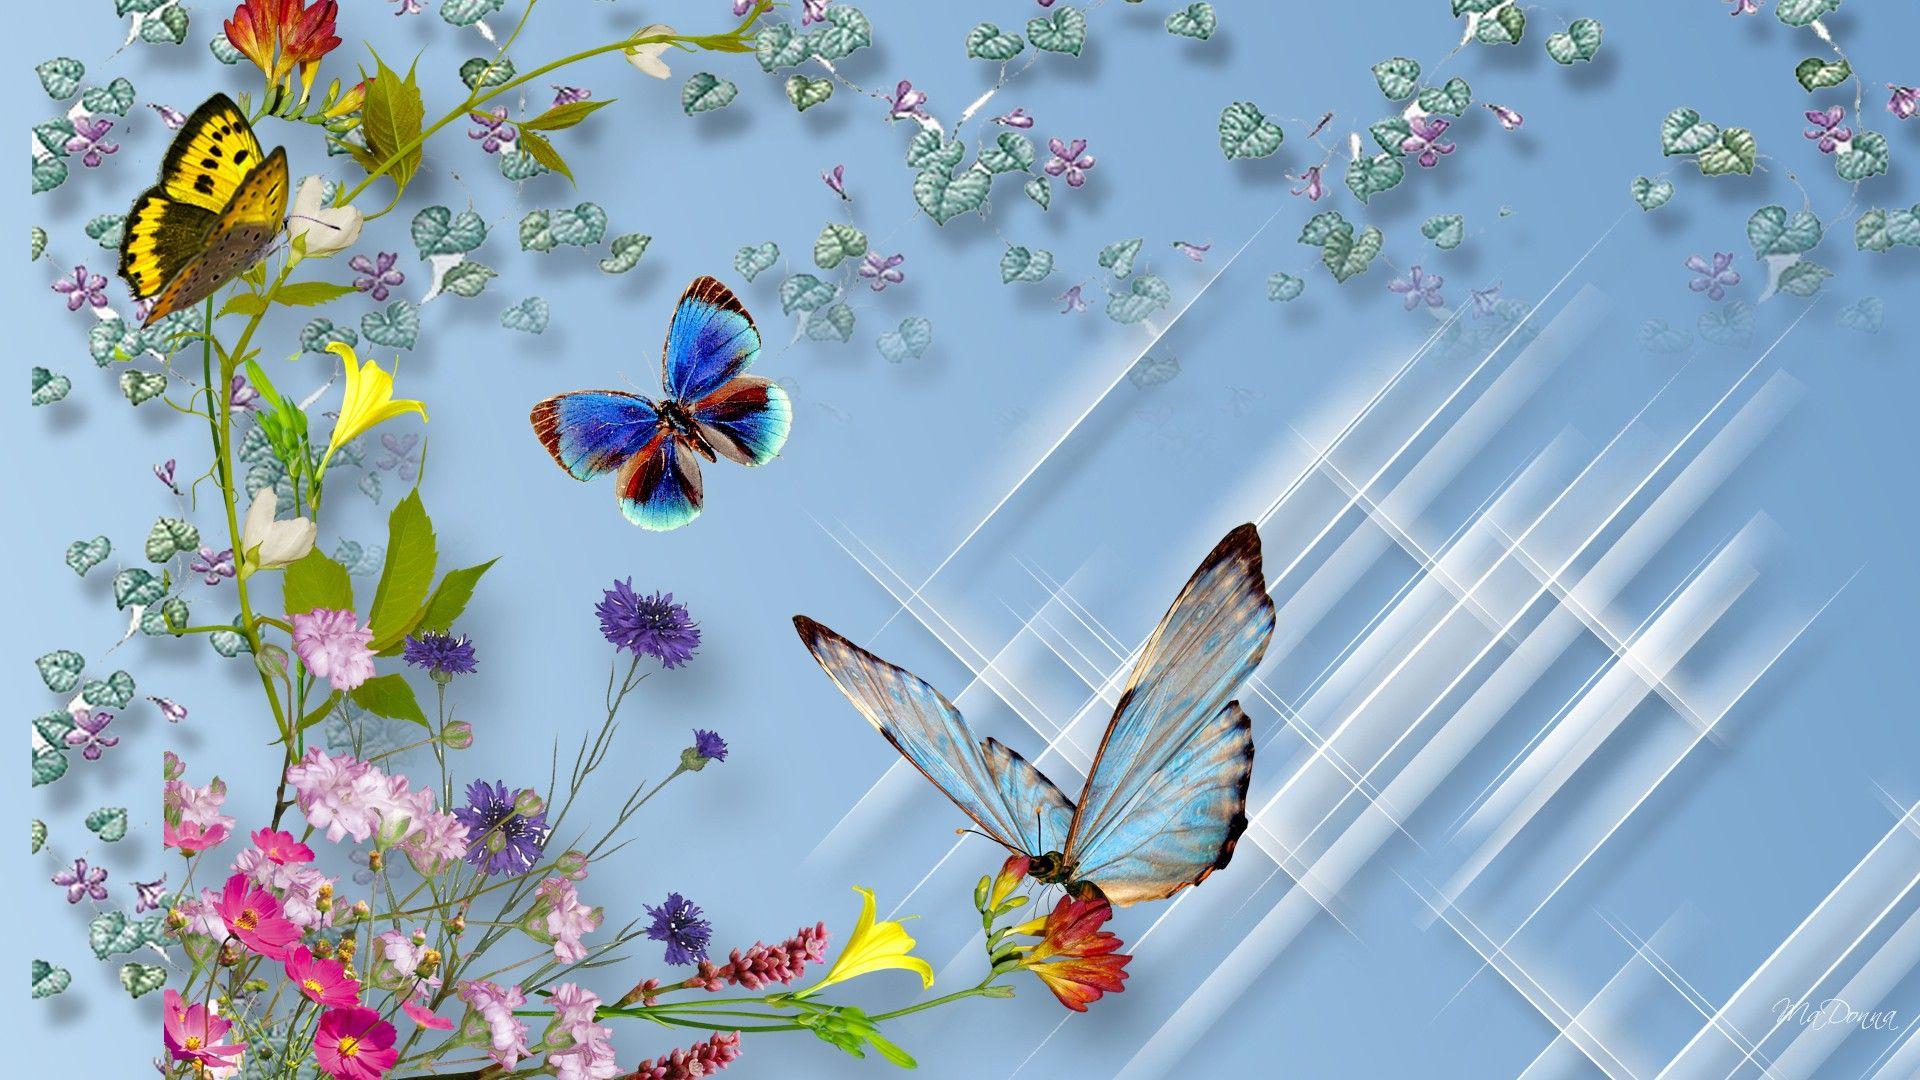 Butterflies and Flowers HD Wallpaper. Background Image